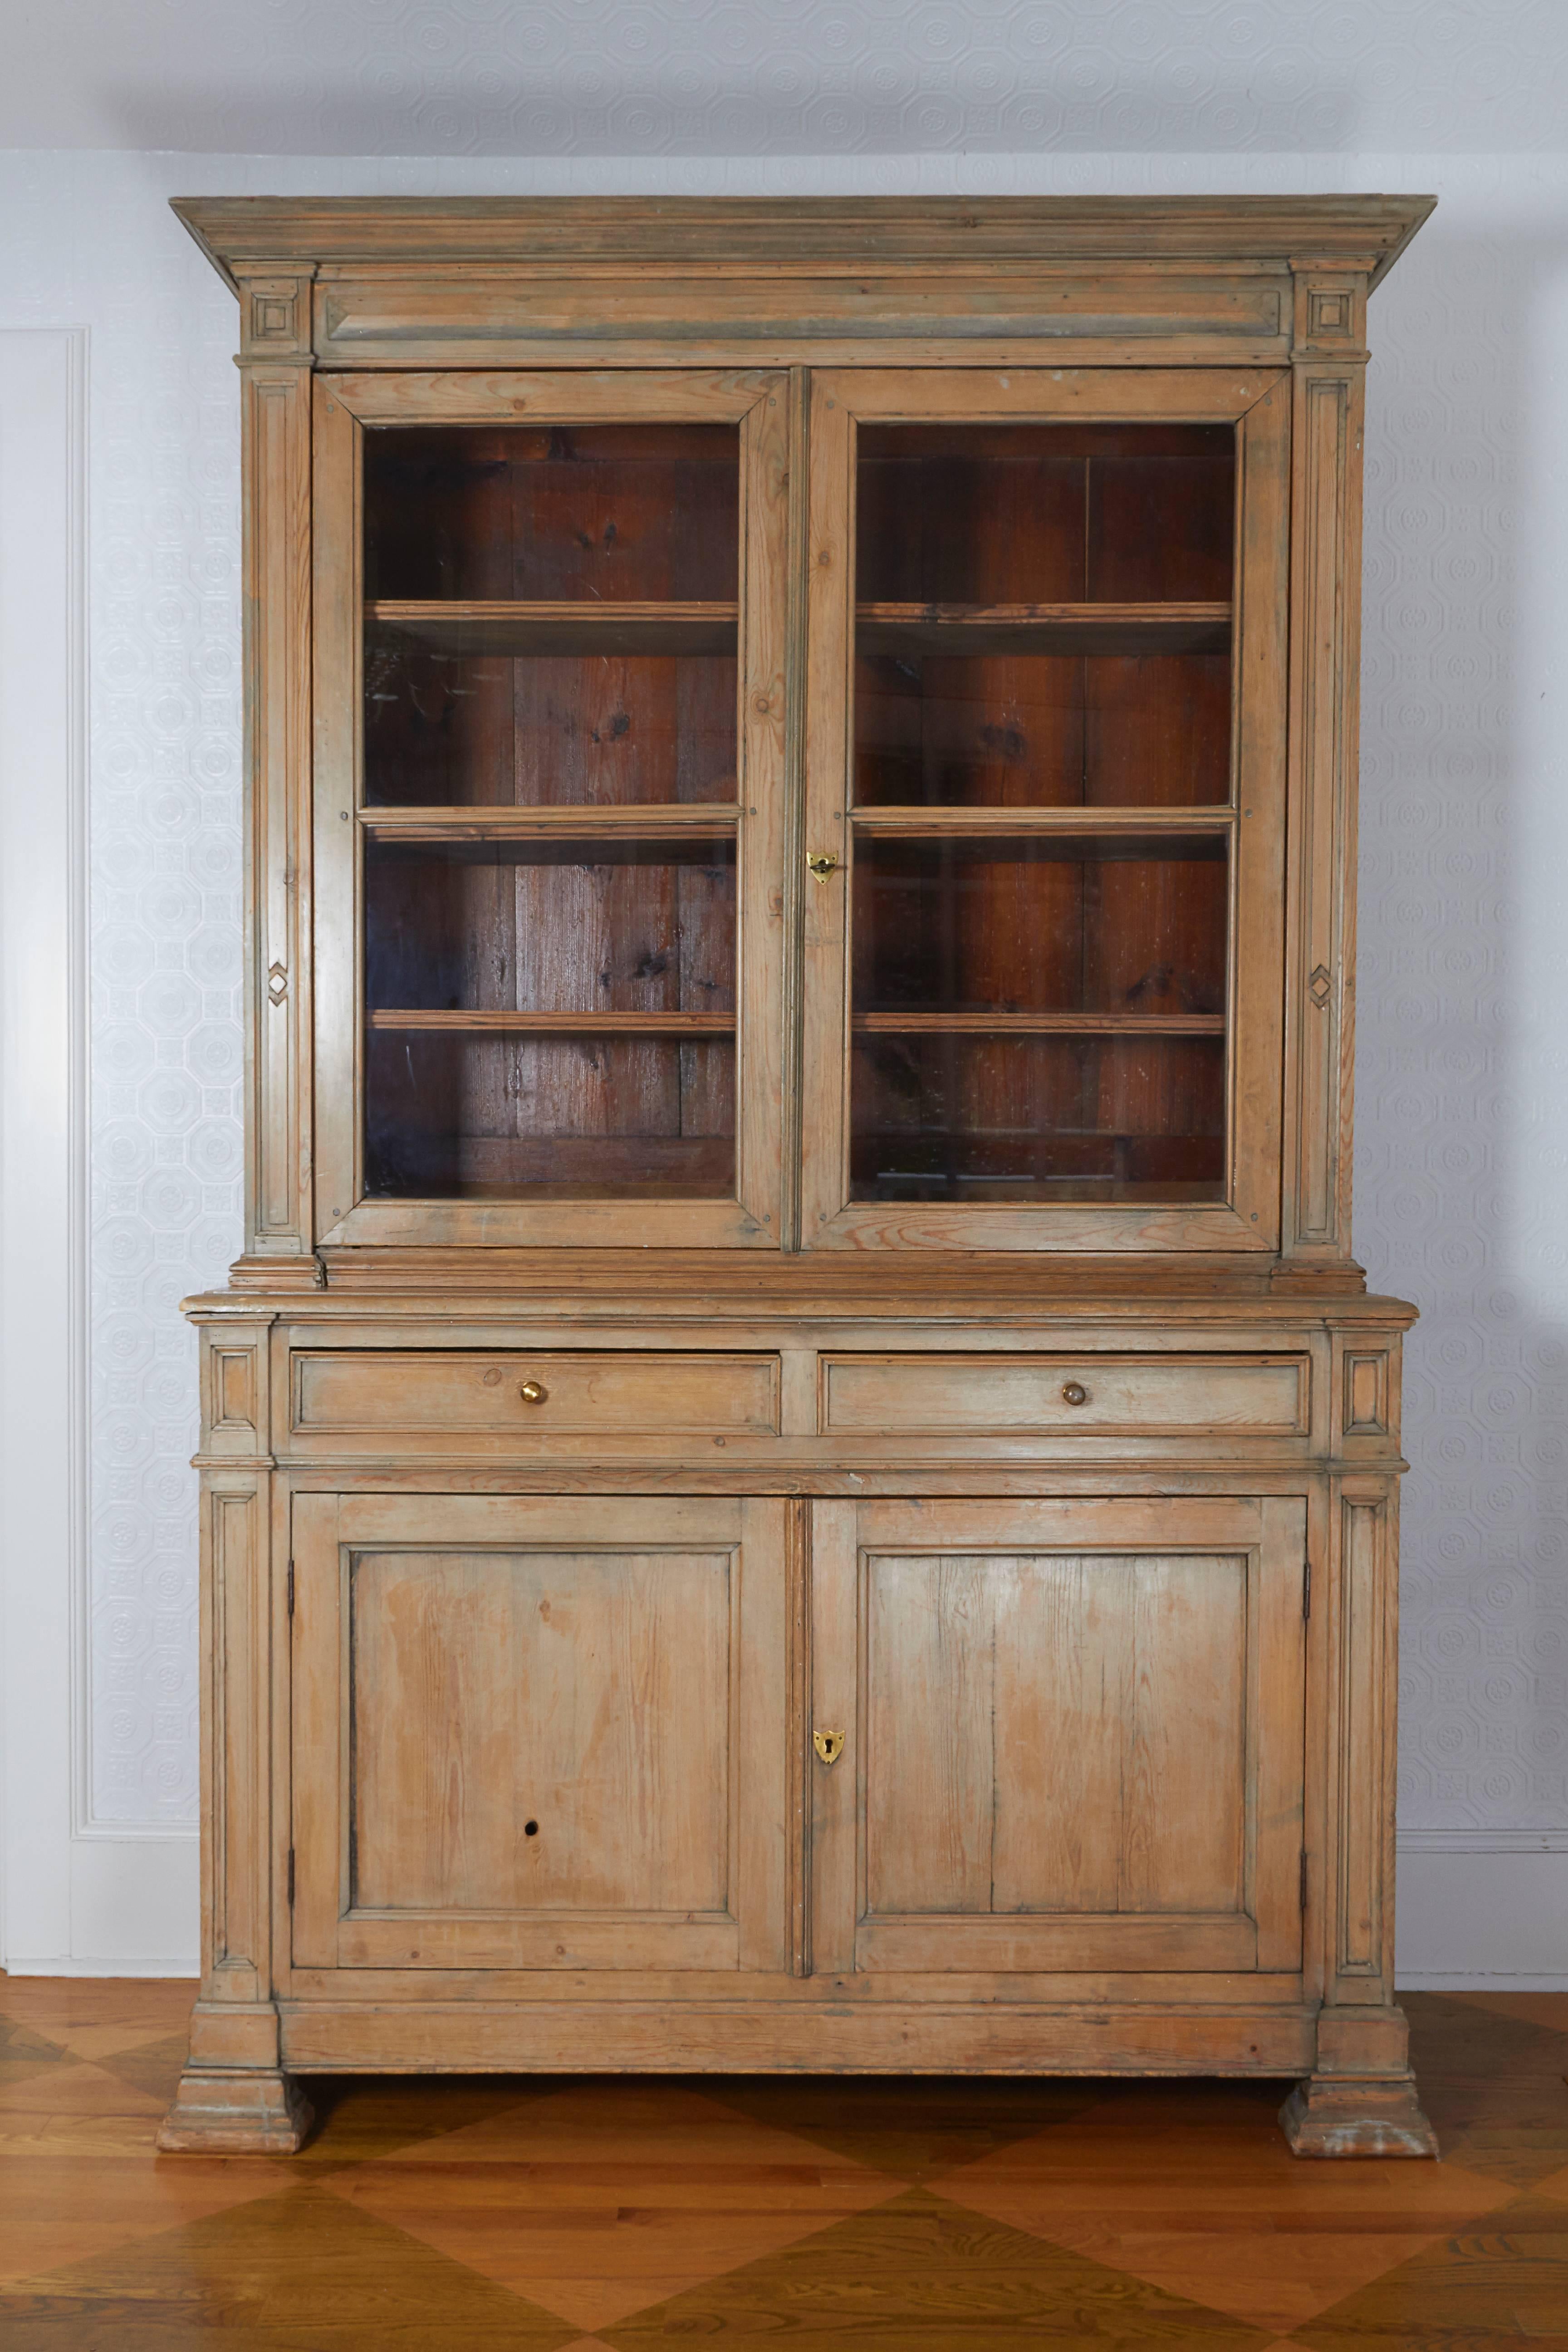 With very attractive patination and faded color; the upper section with glass-front doors opening to shelves; the lower part fitted with two drawers and two doors opening to shelves; on block-form feet.